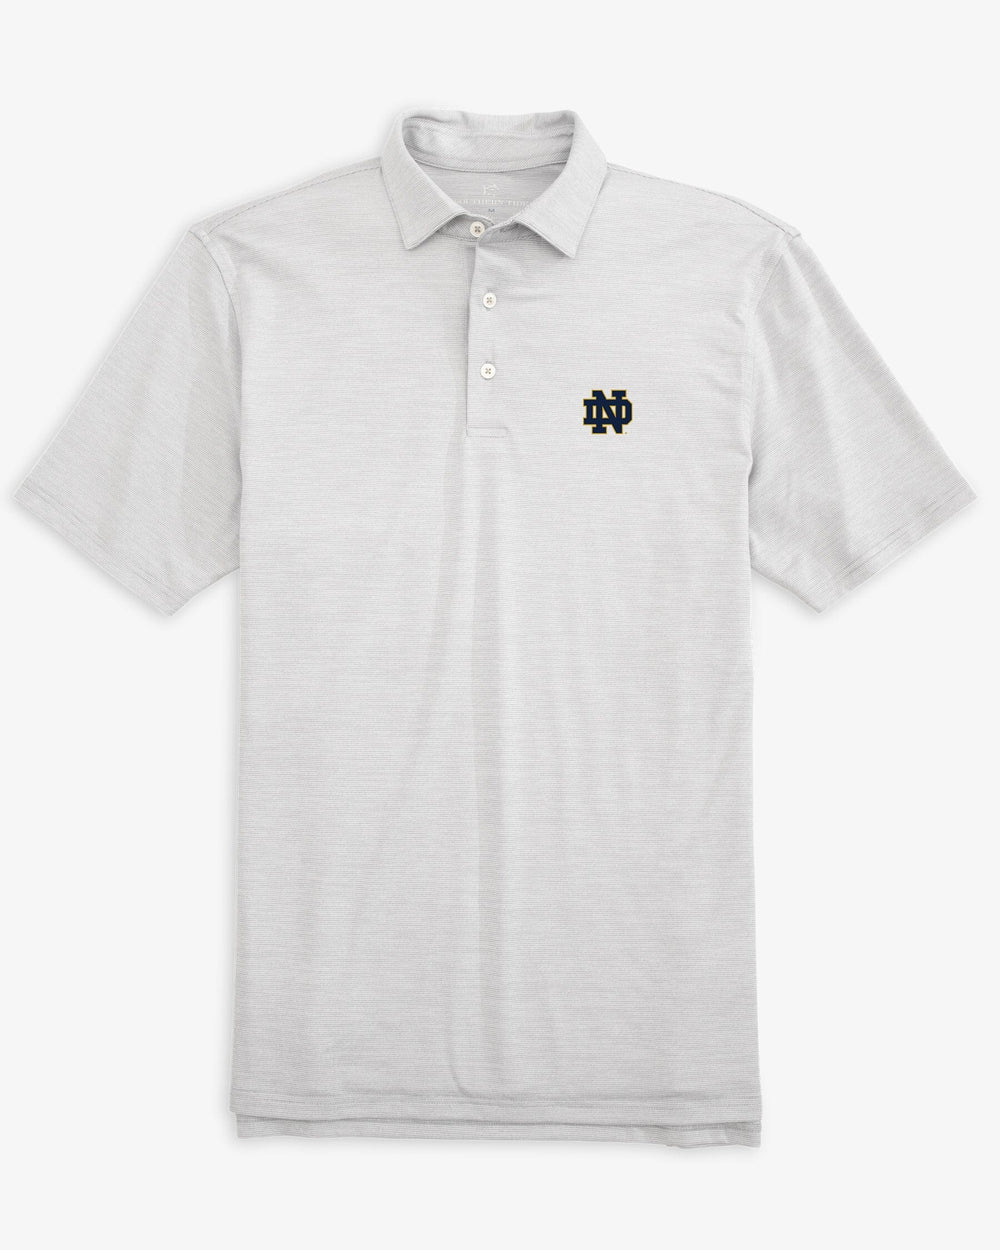 The front of the Notre Dame Fighting Irish Driver Spacedye Polo Shirt by Southern Tide - Slate Grey